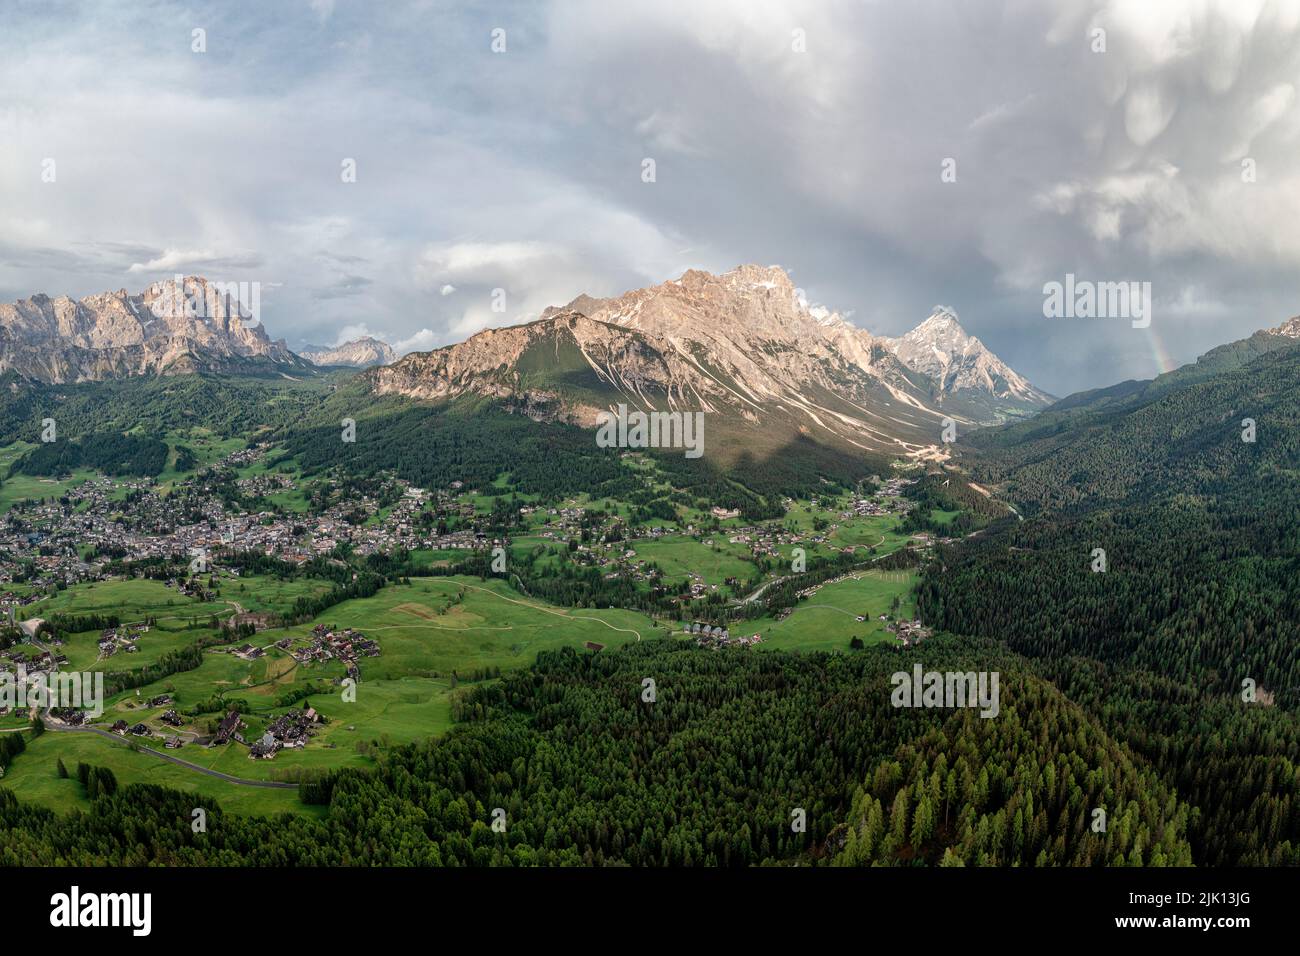 Clouds over Monte Cristallo, Sorapiss, Antelao mountains and woods in spring, Cortina D'Ampezzo, Dolomites, Veneto, Italy, Europe Stock Photo